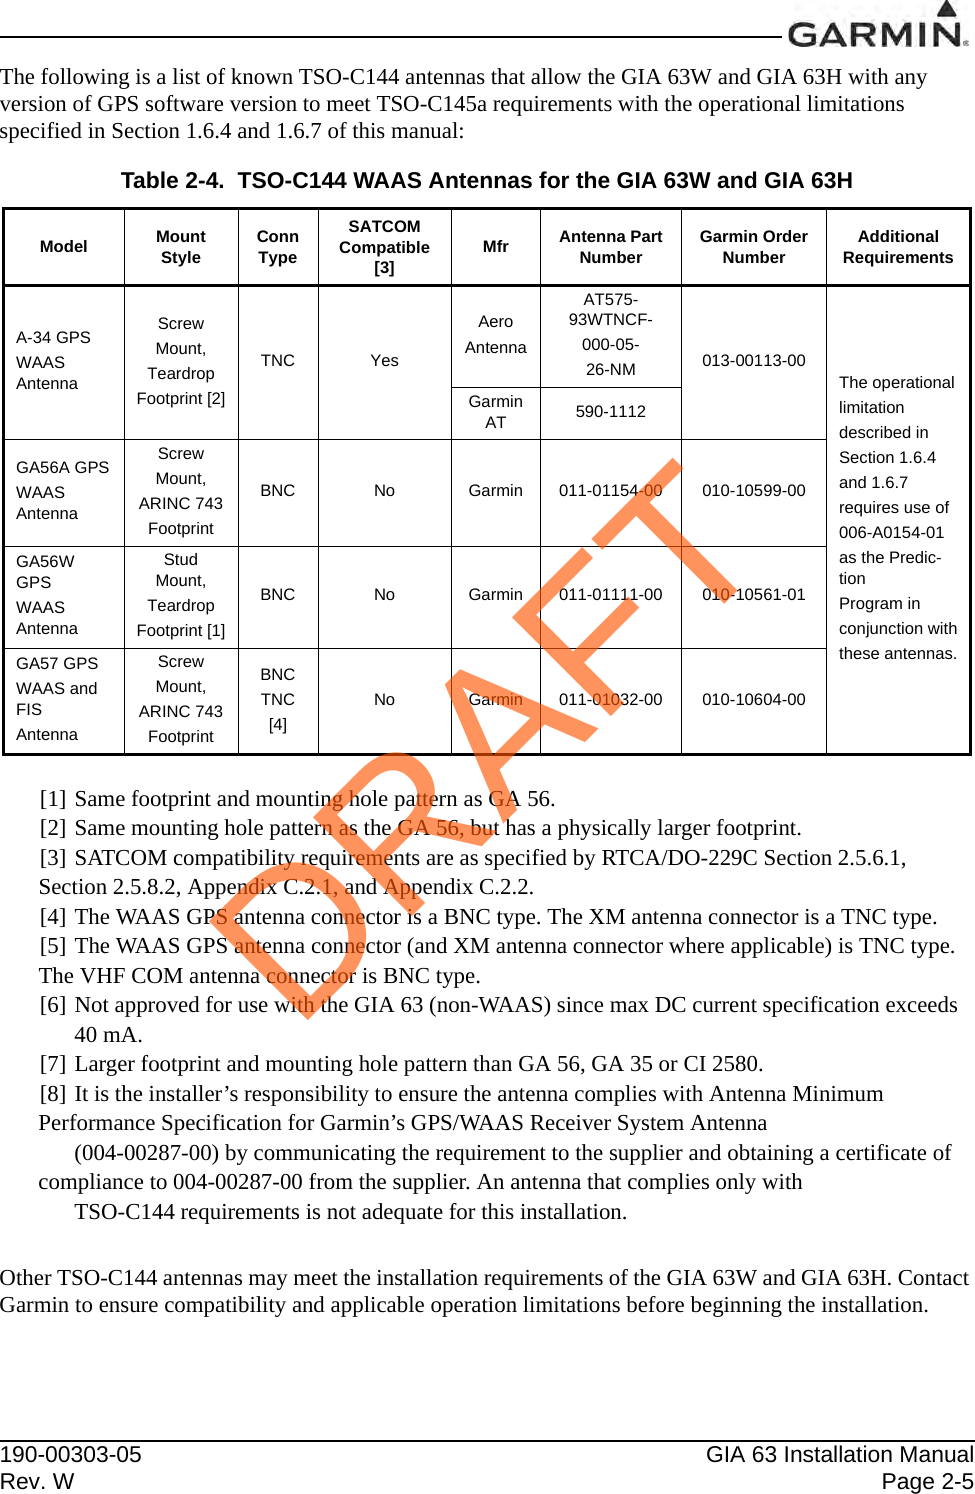 190-00303-05 GIA 63 Installation ManualRev. W Page 2-5The following is a list of known TSO-C144 antennas that allow the GIA 63W and GIA 63H with any version of GPS software version to meet TSO-C145a requirements with the operational limitations specified in Section 1.6.4 and 1.6.7 of this manual:[1] Same footprint and mounting hole pattern as GA 56.[2] Same mounting hole pattern as the GA 56, but has a physically larger footprint.[3] SATCOM compatibility requirements are as specified by RTCA/DO-229C Section 2.5.6.1, Section 2.5.8.2, Appendix C.2.1, and Appendix C.2.2.[4] The WAAS GPS antenna connector is a BNC type. The XM antenna connector is a TNC type.[5] The WAAS GPS antenna connector (and XM antenna connector where applicable) is TNC type. The VHF COM antenna connector is BNC type.[6] Not approved for use with the GIA 63 (non-WAAS) since max DC current specification exceeds40 mA.[7] Larger footprint and mounting hole pattern than GA 56, GA 35 or CI 2580.[8] It is the installer’s responsibility to ensure the antenna complies with Antenna Minimum Performance Specification for Garmin’s GPS/WAAS Receiver System Antenna (004-00287-00) by communicating the requirement to the supplier and obtaining a certificate of compliance to 004-00287-00 from the supplier. An antenna that complies only with TSO-C144 requirements is not adequate for this installation.Other TSO-C144 antennas may meet the installation requirements of the GIA 63W and GIA 63H. Contact Garmin to ensure compatibility and applicable operation limitations before beginning the installation.Table 2-4.  TSO-C144 WAAS Antennas for the GIA 63W and GIA 63HModel Mount Style Conn TypeSATCOM Compatible [3] Mfr Antenna Part Number Garmin Order Number Additional RequirementsA-34 GPSWAAS AntennaScrewMount,TeardropFootprint [2]TNC YesAeroAntennaAT575-93WTNCF-000-05-26-NM 013-00113-00The operationallimitationdescribed inSection 1.6.4and 1.6.7requires use of006-A0154-01as the Predic-tionProgram inconjunction withthese antennas.Garmin AT 590-1112GA56A GPSWAAS AntennaScrewMount,ARINC 743FootprintBNC No Garmin 011-01154-00 010-10599-00GA56W GPSWAAS AntennaStud Mount,TeardropFootprint [1]BNC No Garmin 011-01111-00 010-10561-01GA57 GPSWAAS and FISAntennaScrewMount,ARINC 743FootprintBNCTNC[4]No Garmin 011-01032-00 010-10604-00DRAFT